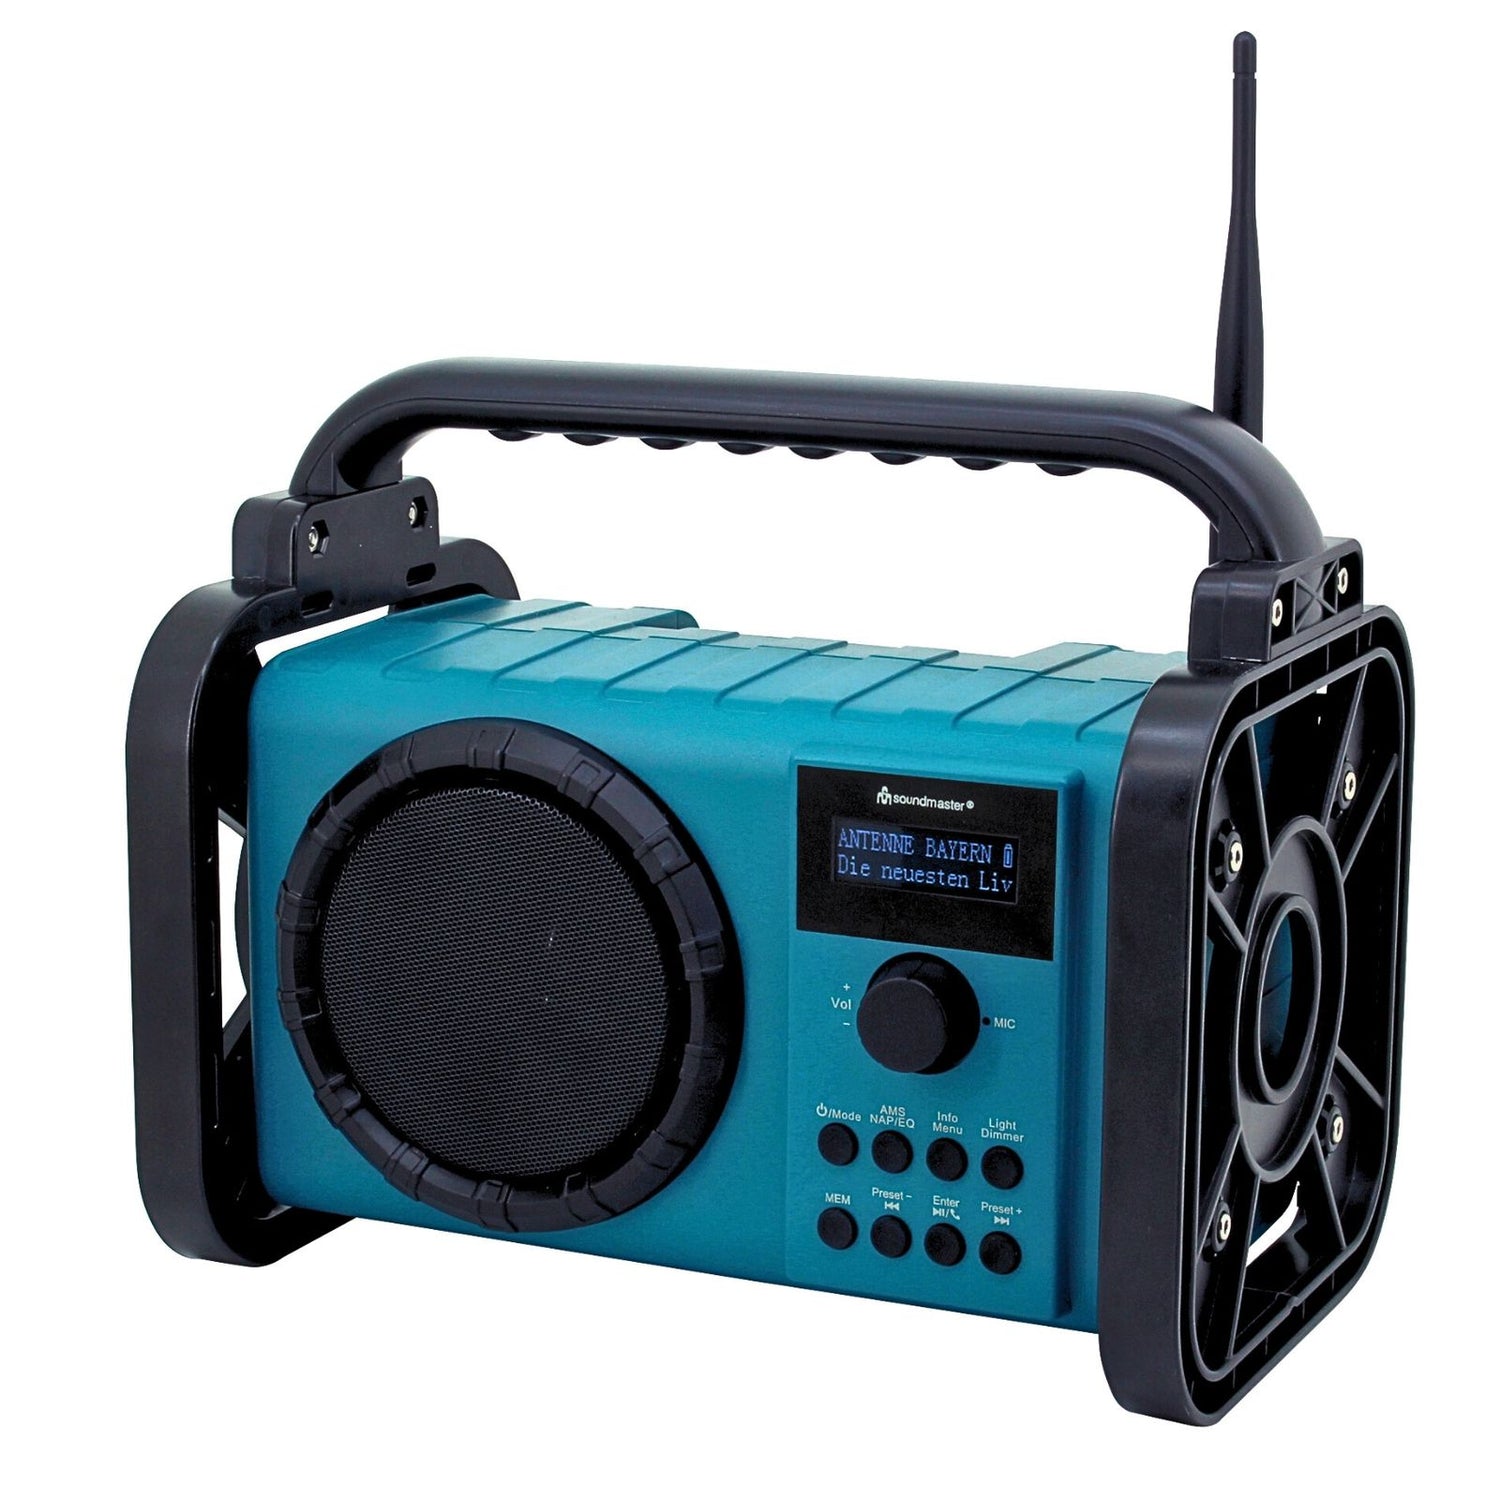 Soundmaster DAB80 construction site radio with DAB+ FM Bluetooth and Li-Ion battery IP44 dust and splash-proof